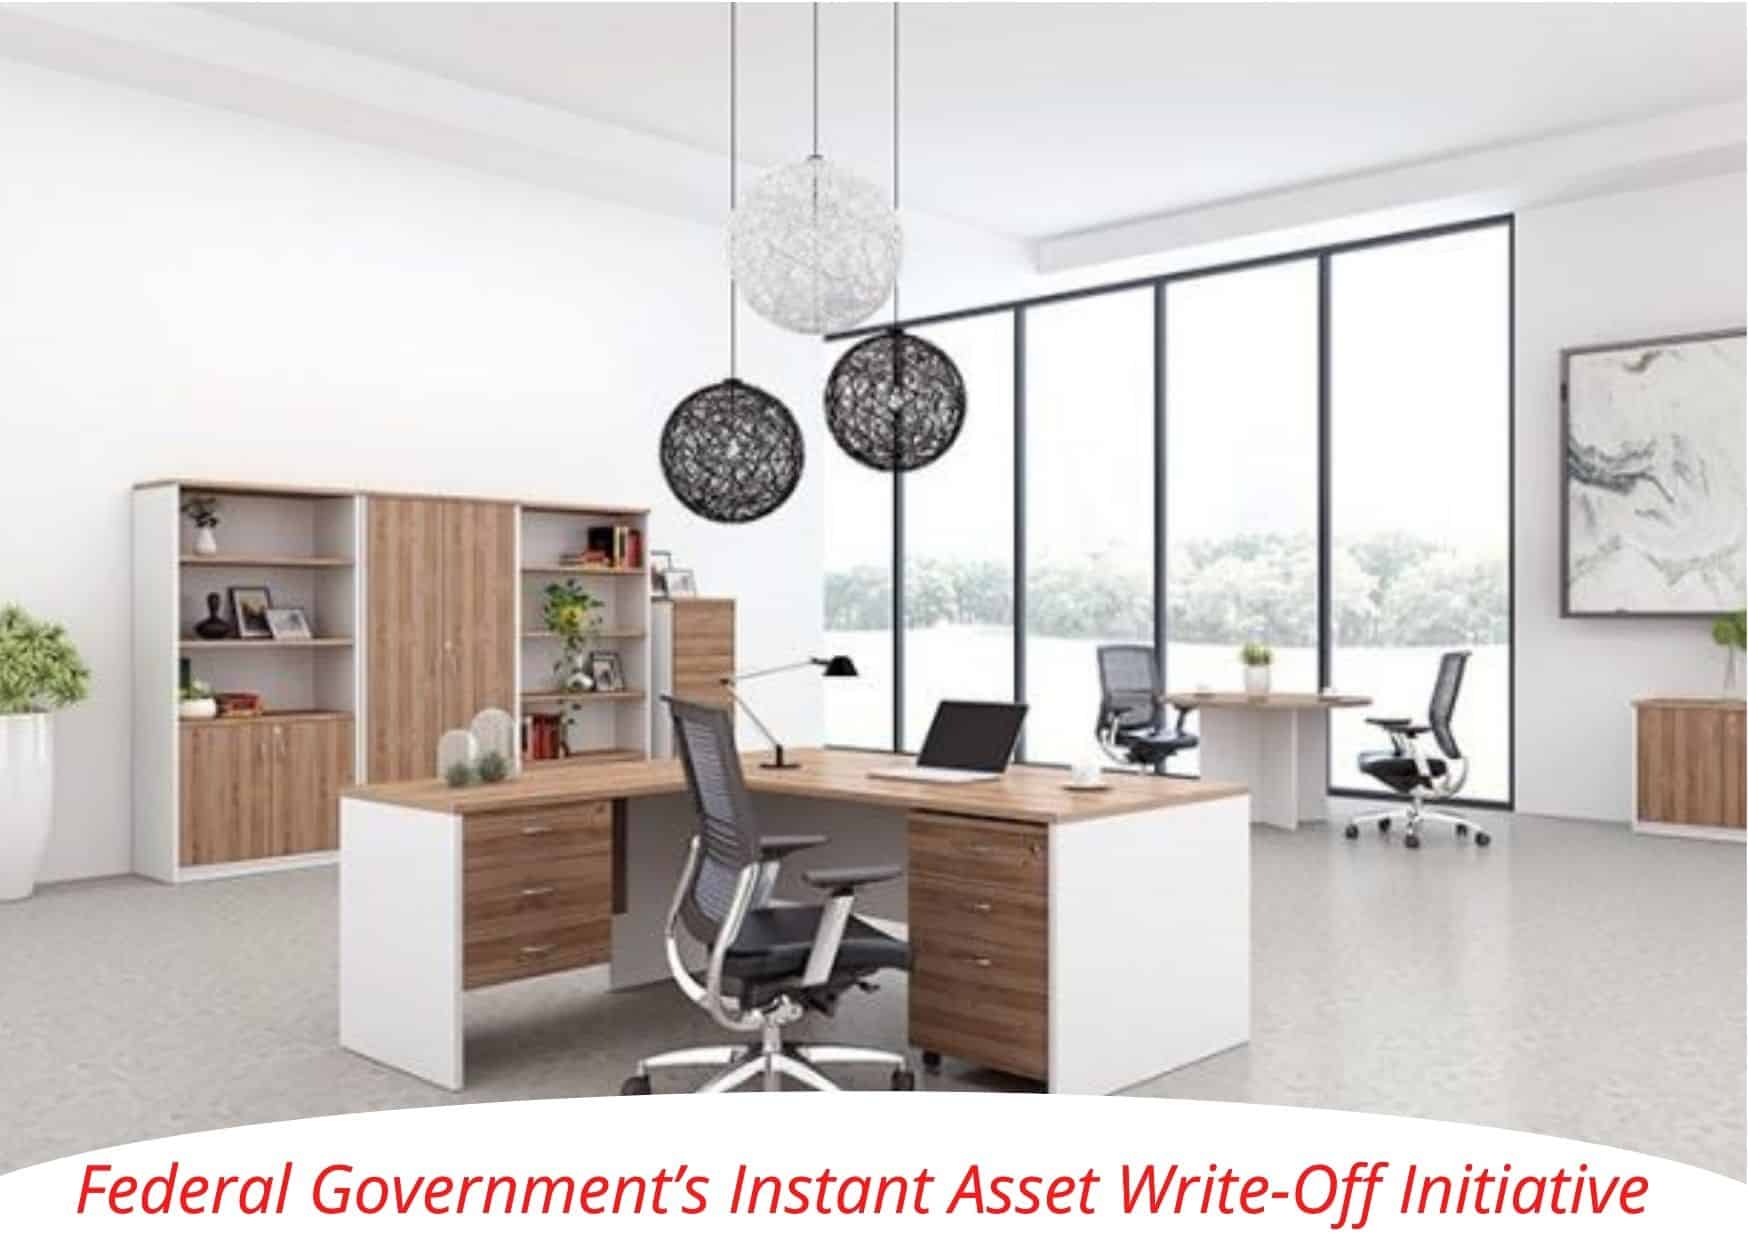 Federal Government’s Instant Asset Write-Off Initiative